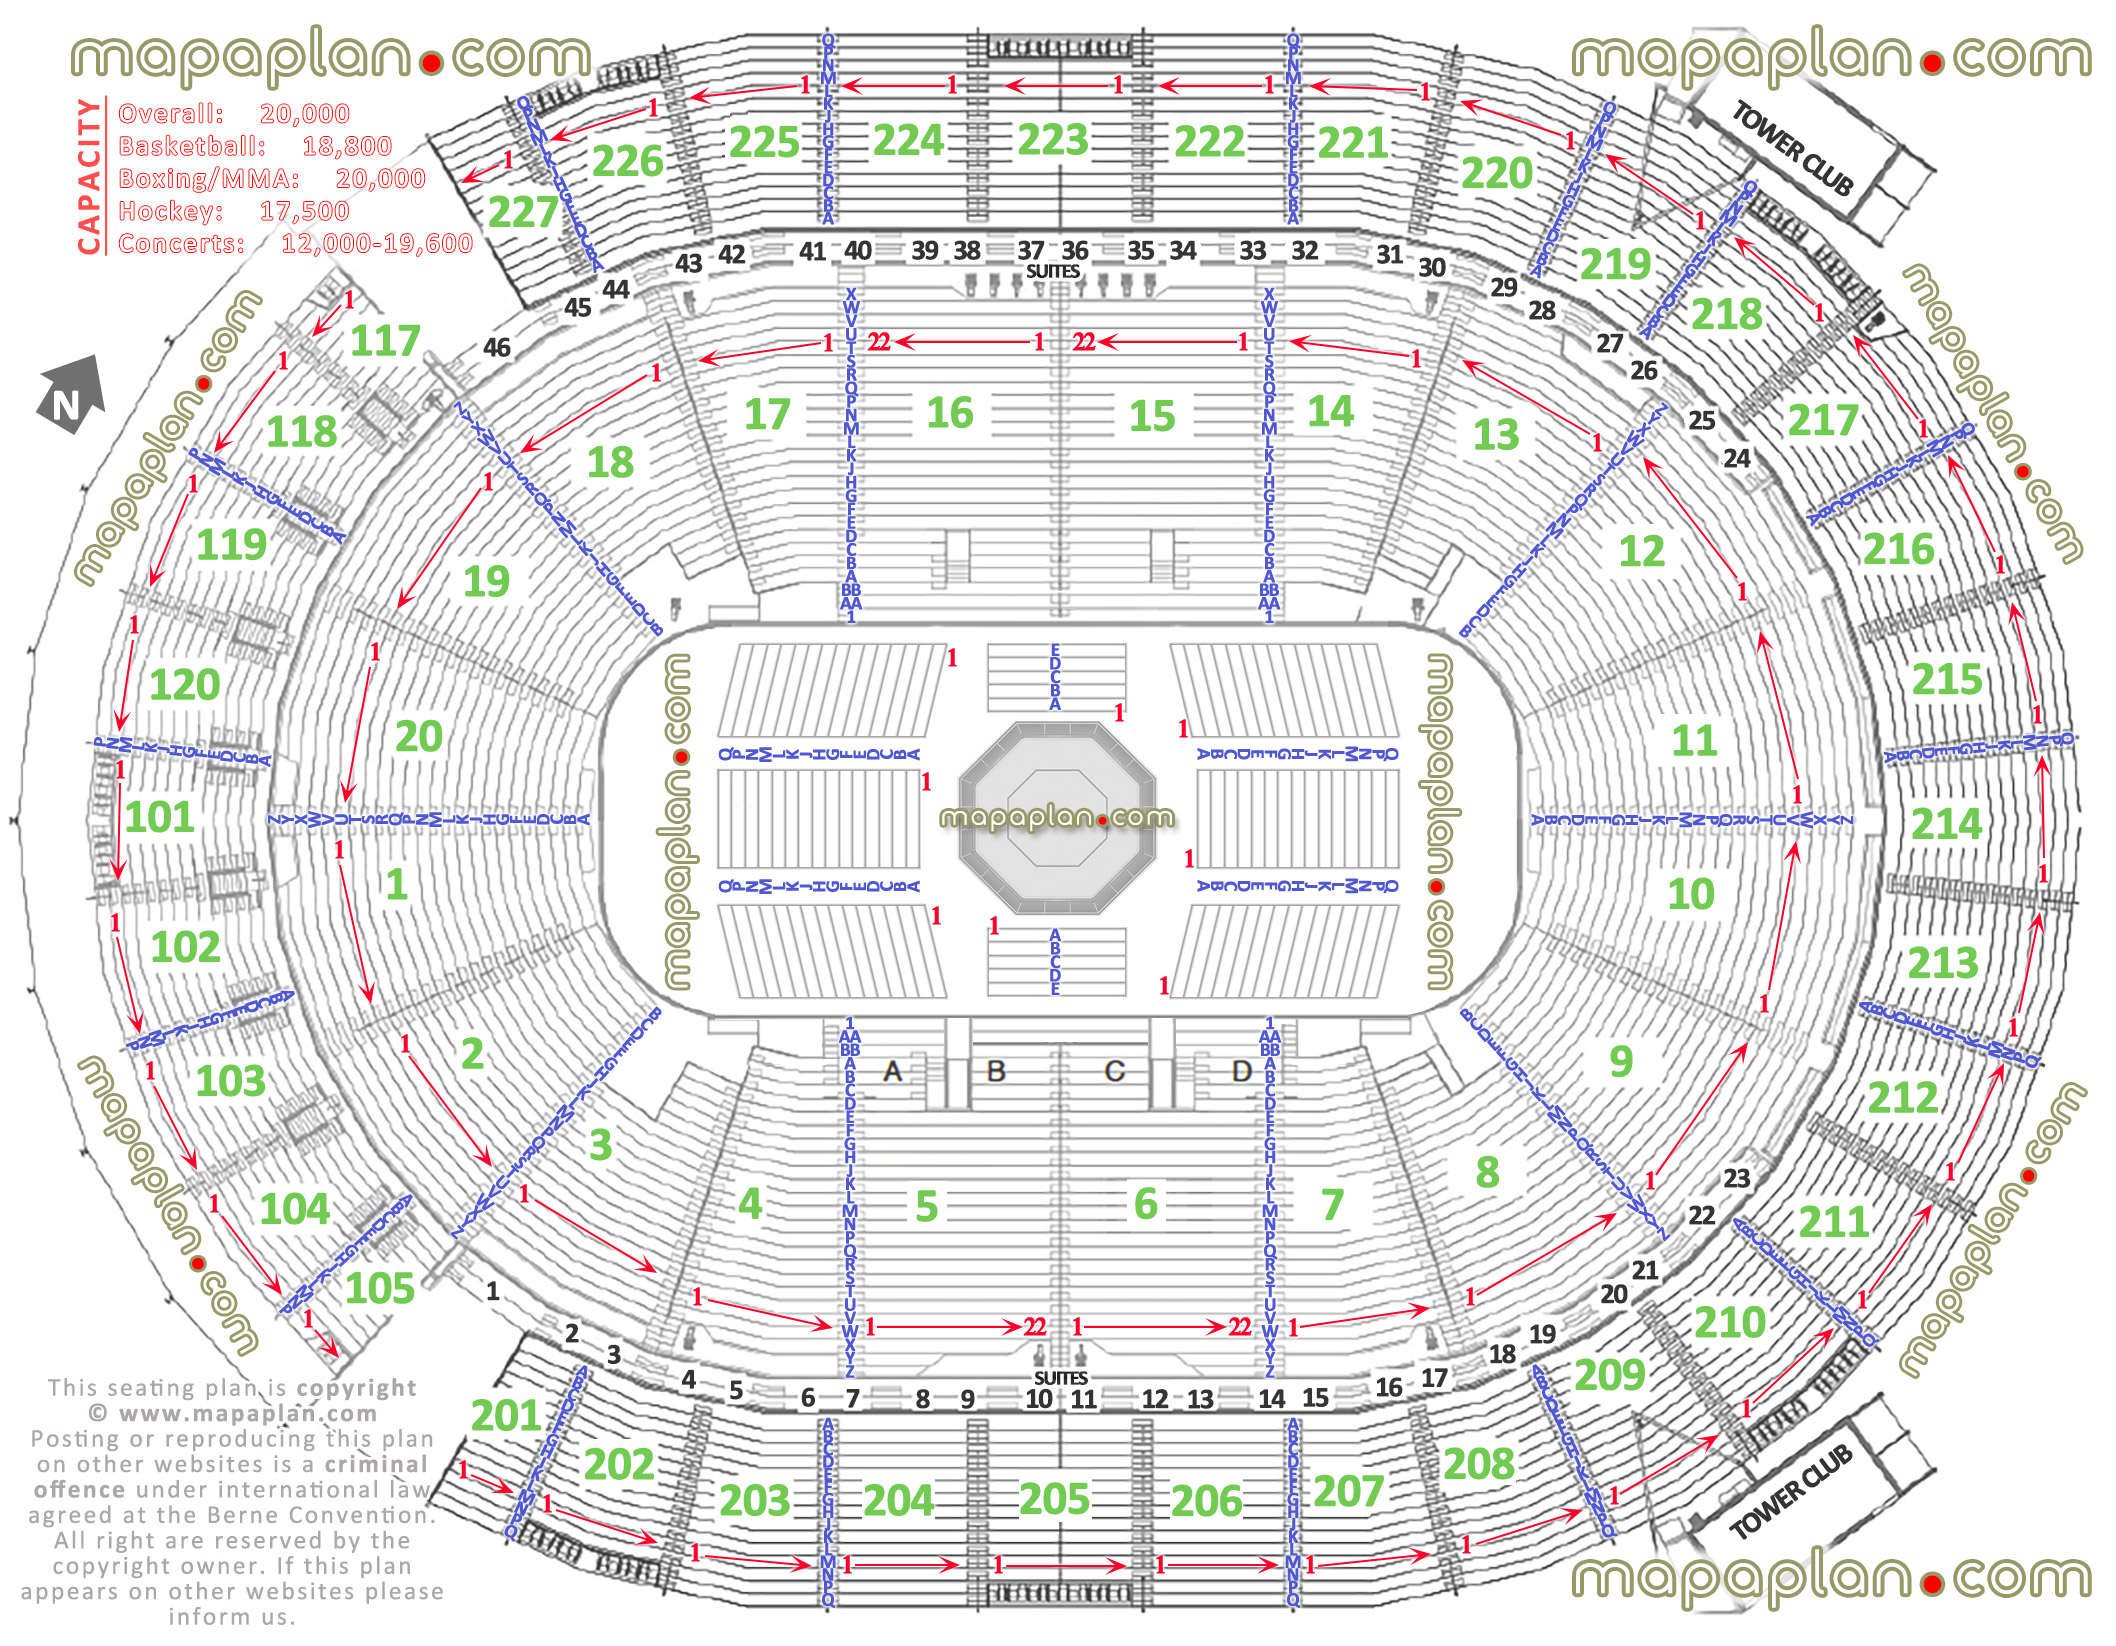 New T-Mobile Arena MGM-AEG - UFC 200 detailed seating chart ...